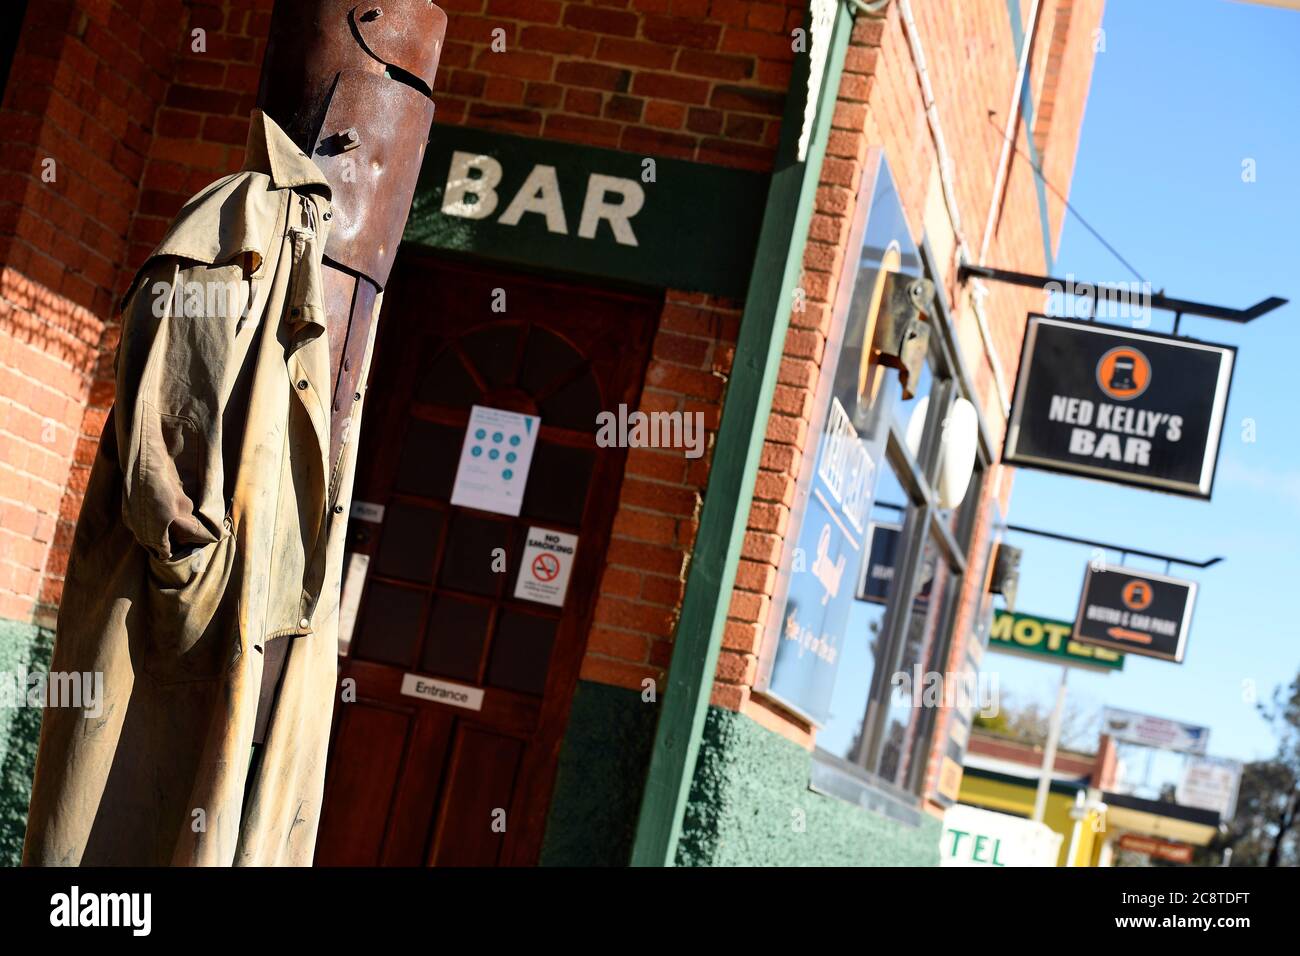 Glenrowan, Victoria. A Ned Kelly statue stands guard at the entrance to the bar of the Glenrowan Hotel in Gladstone Street, Glenrowan. Stock Photo